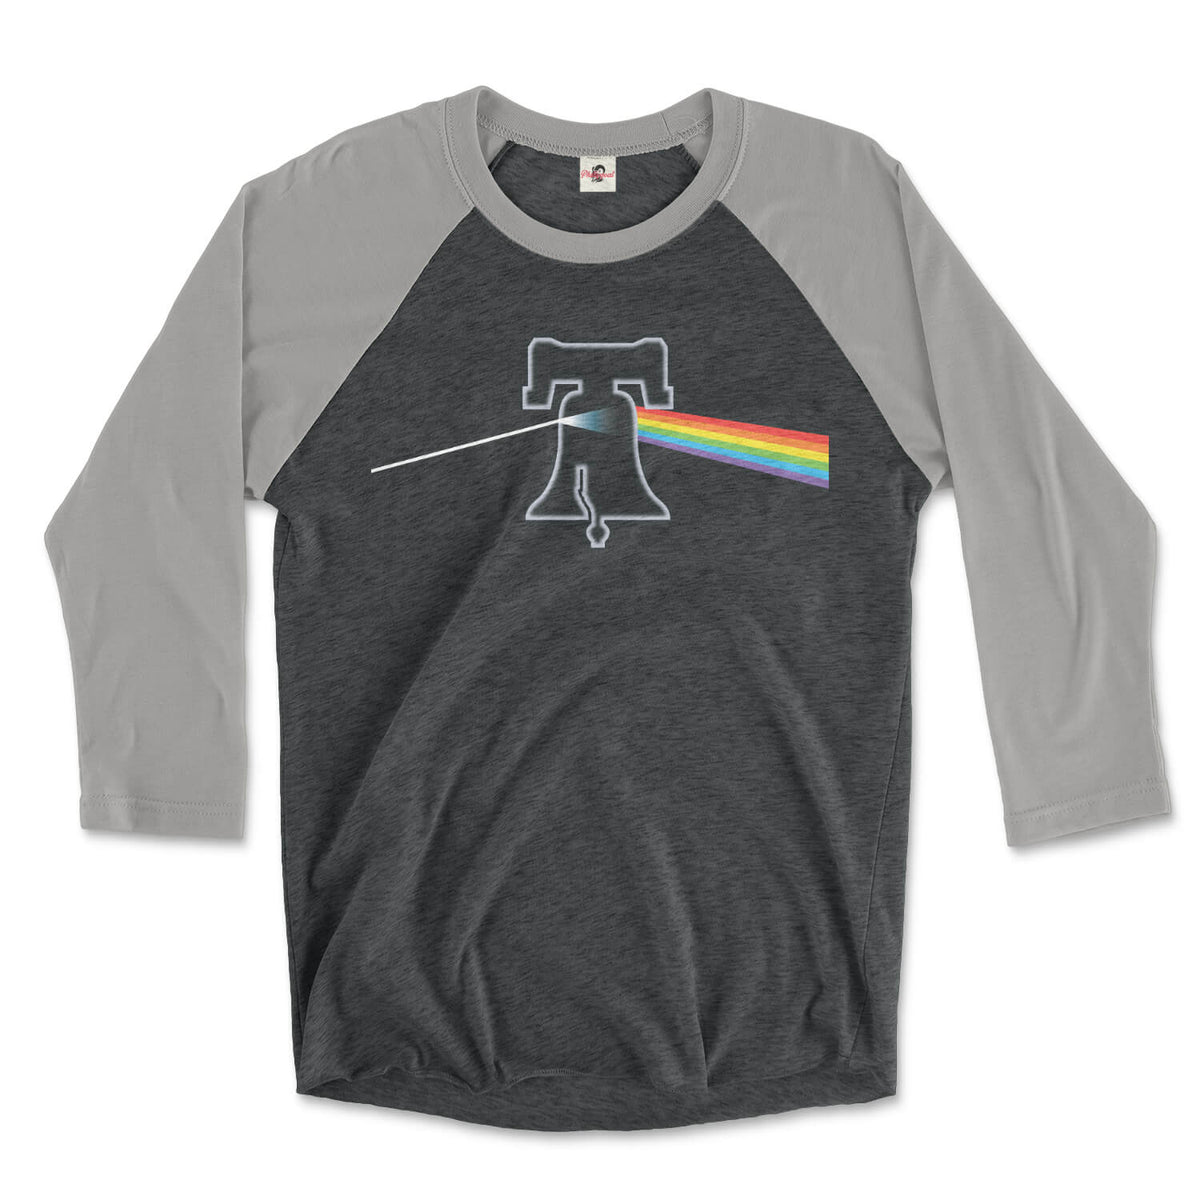 pink floyd philadelphia with liberty bell in dark side of the moon rainbow prism design on a premium heather grey and vintage black 3/4 long sleeve raglan tee from phillygoat